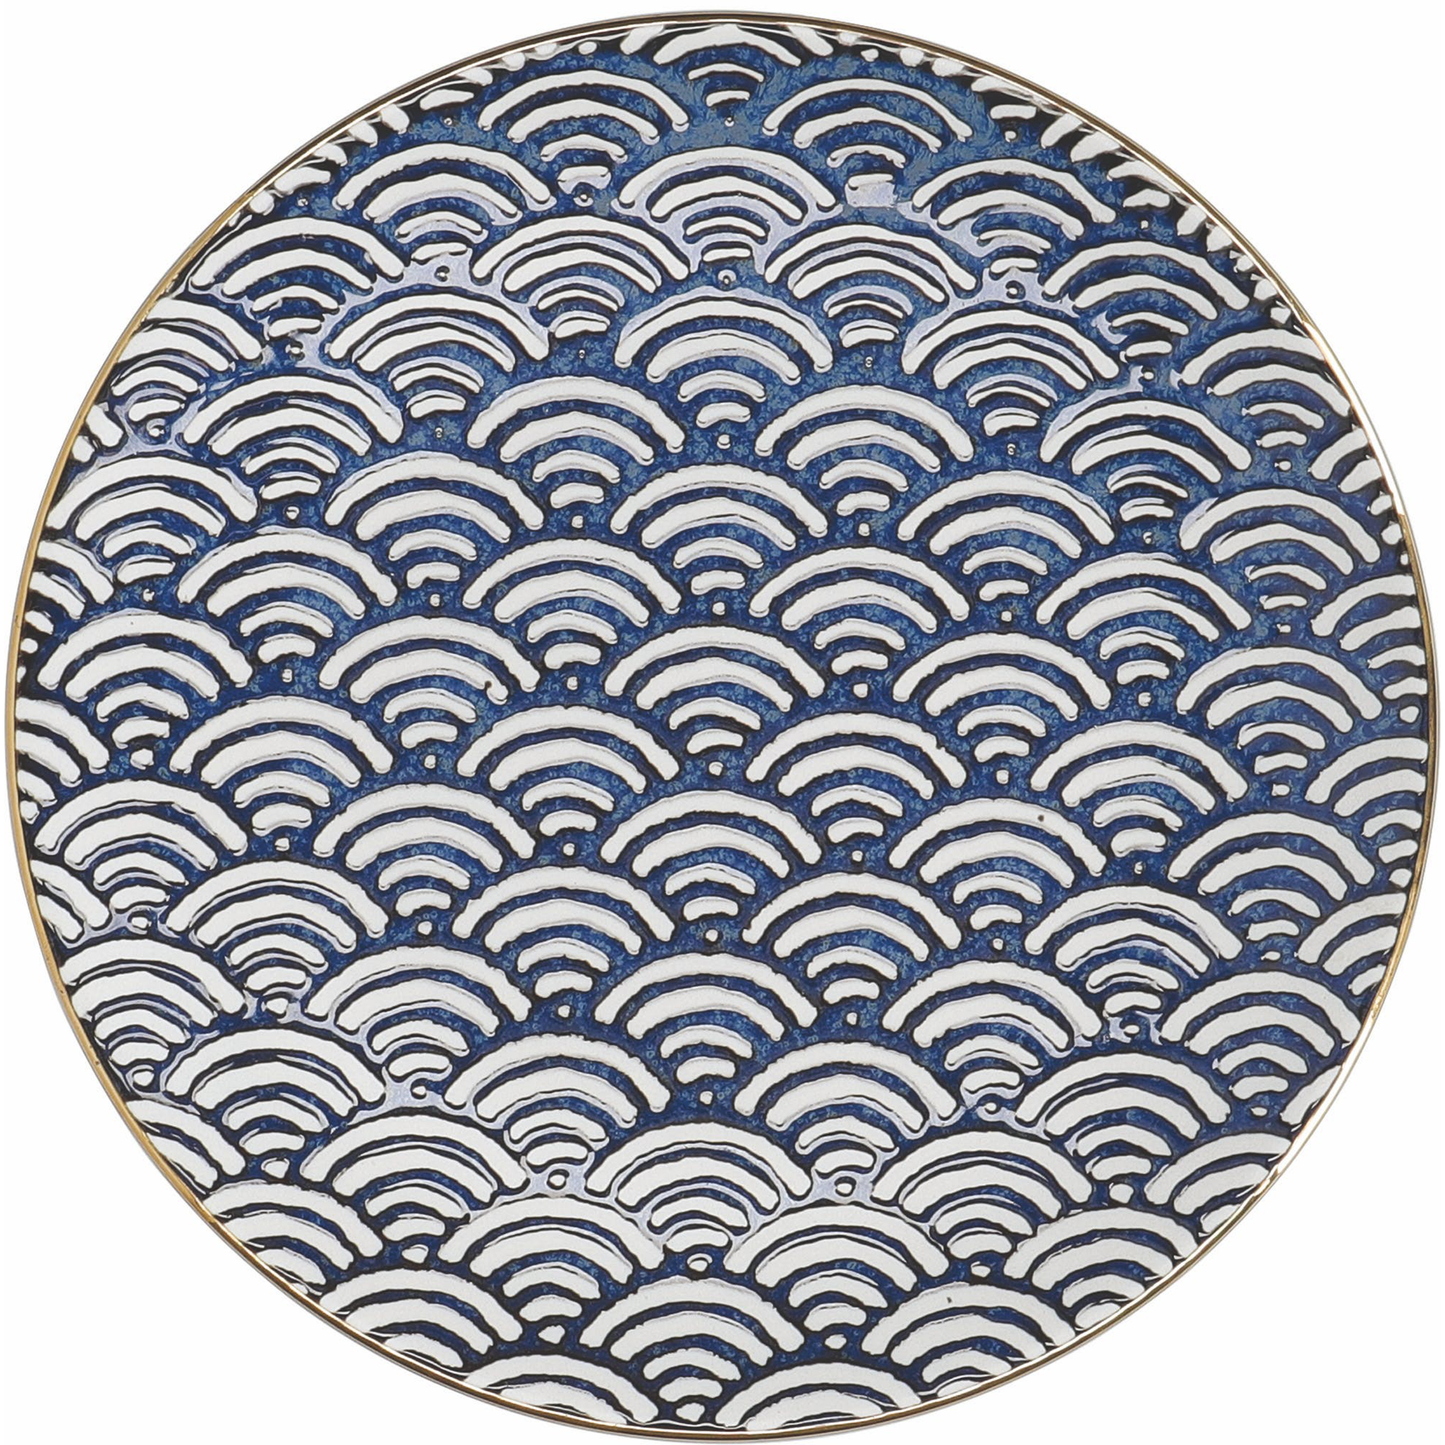 a gold rimmed side plate with a blue and white wave pattern